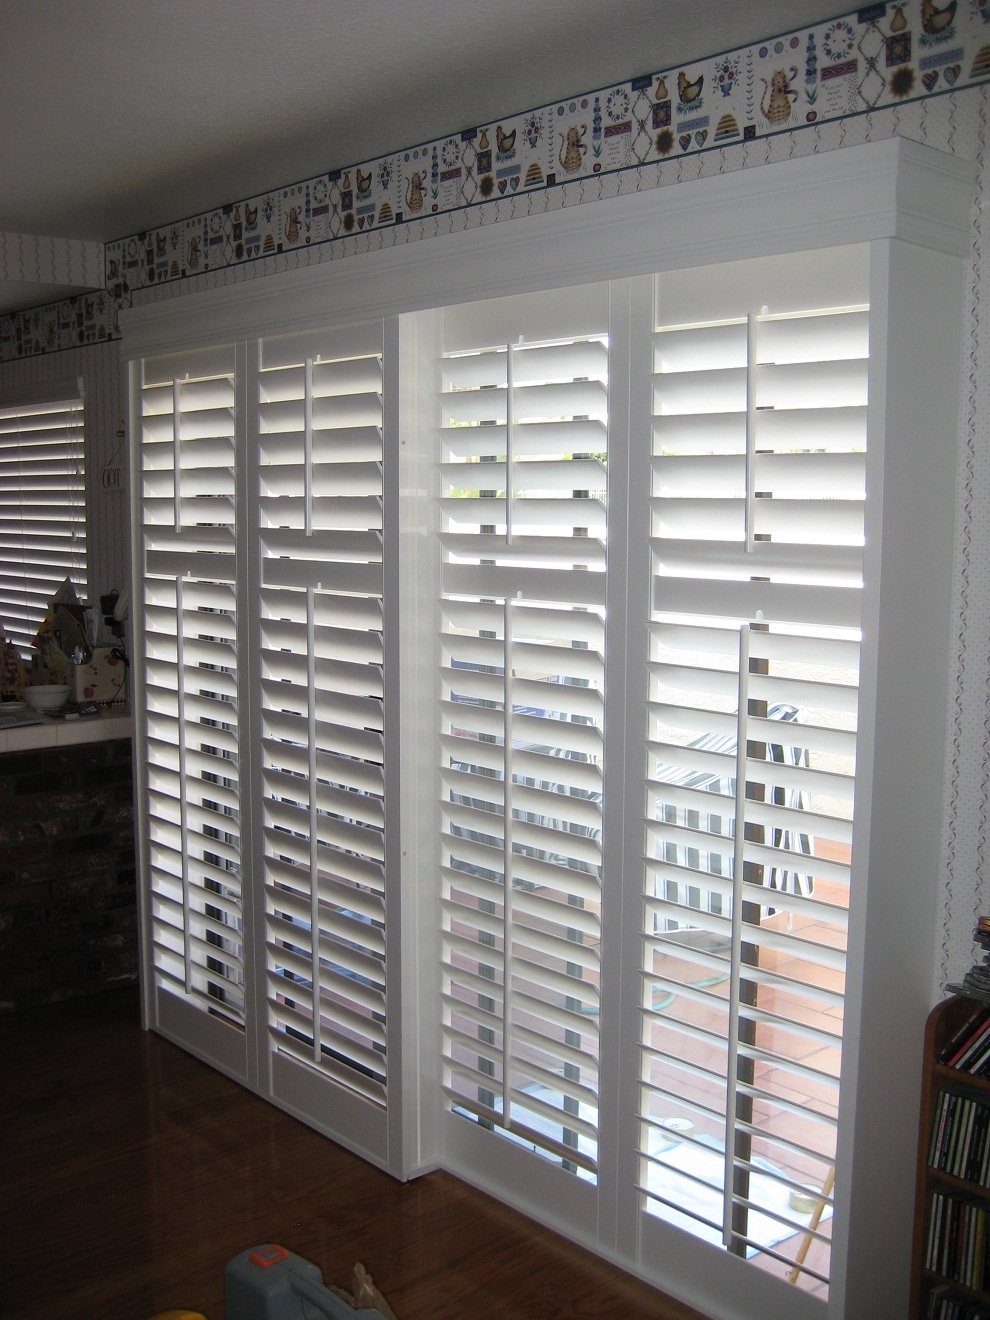 Faux Wood Shutters For Sliding Doorswood blinds for sliding glass door trending sliding door